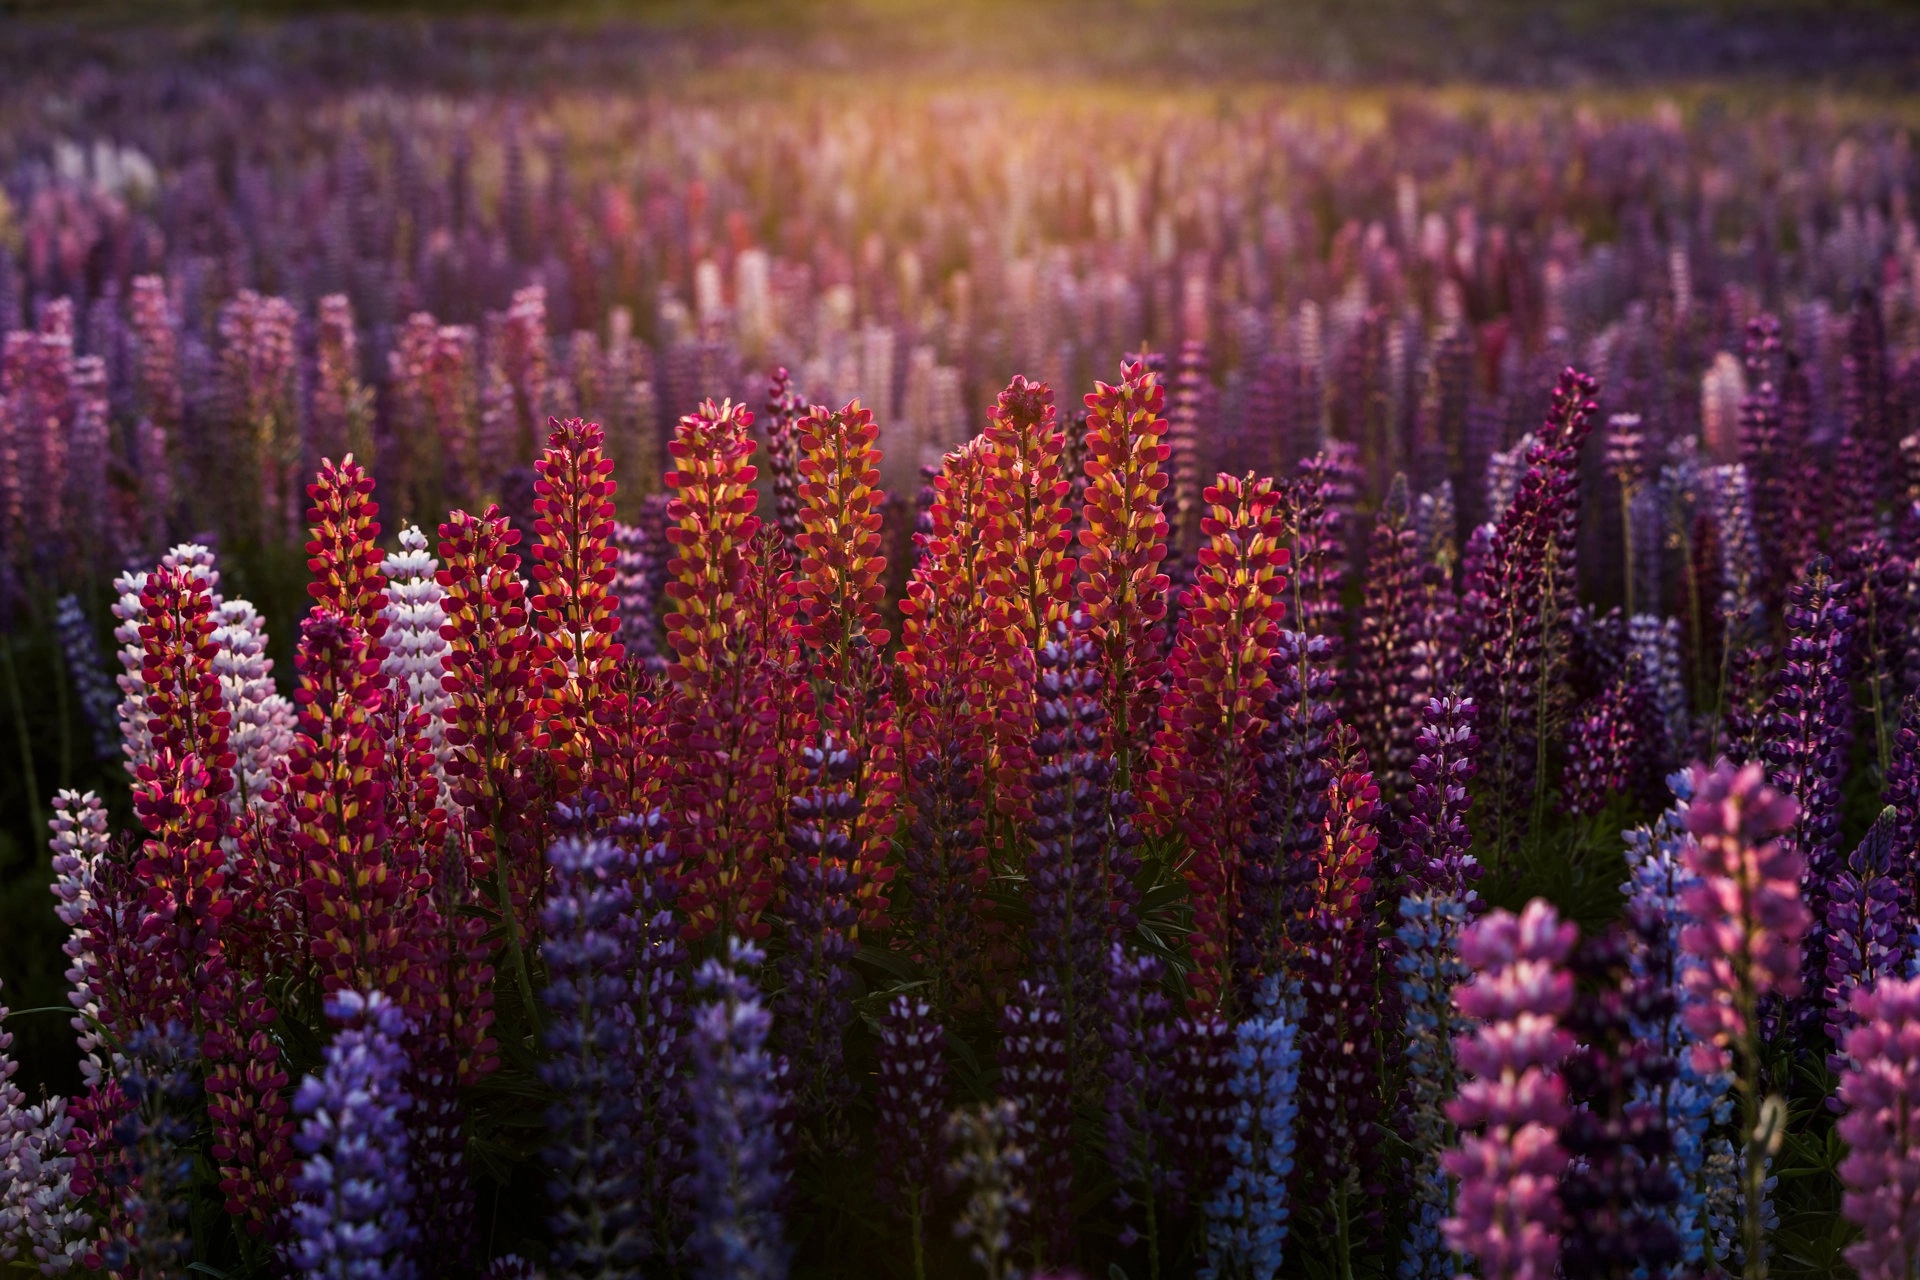 landscape, Red flowers, Blue flowers, Pink flowers, Lupines, Blurred, Nature Wallpaper